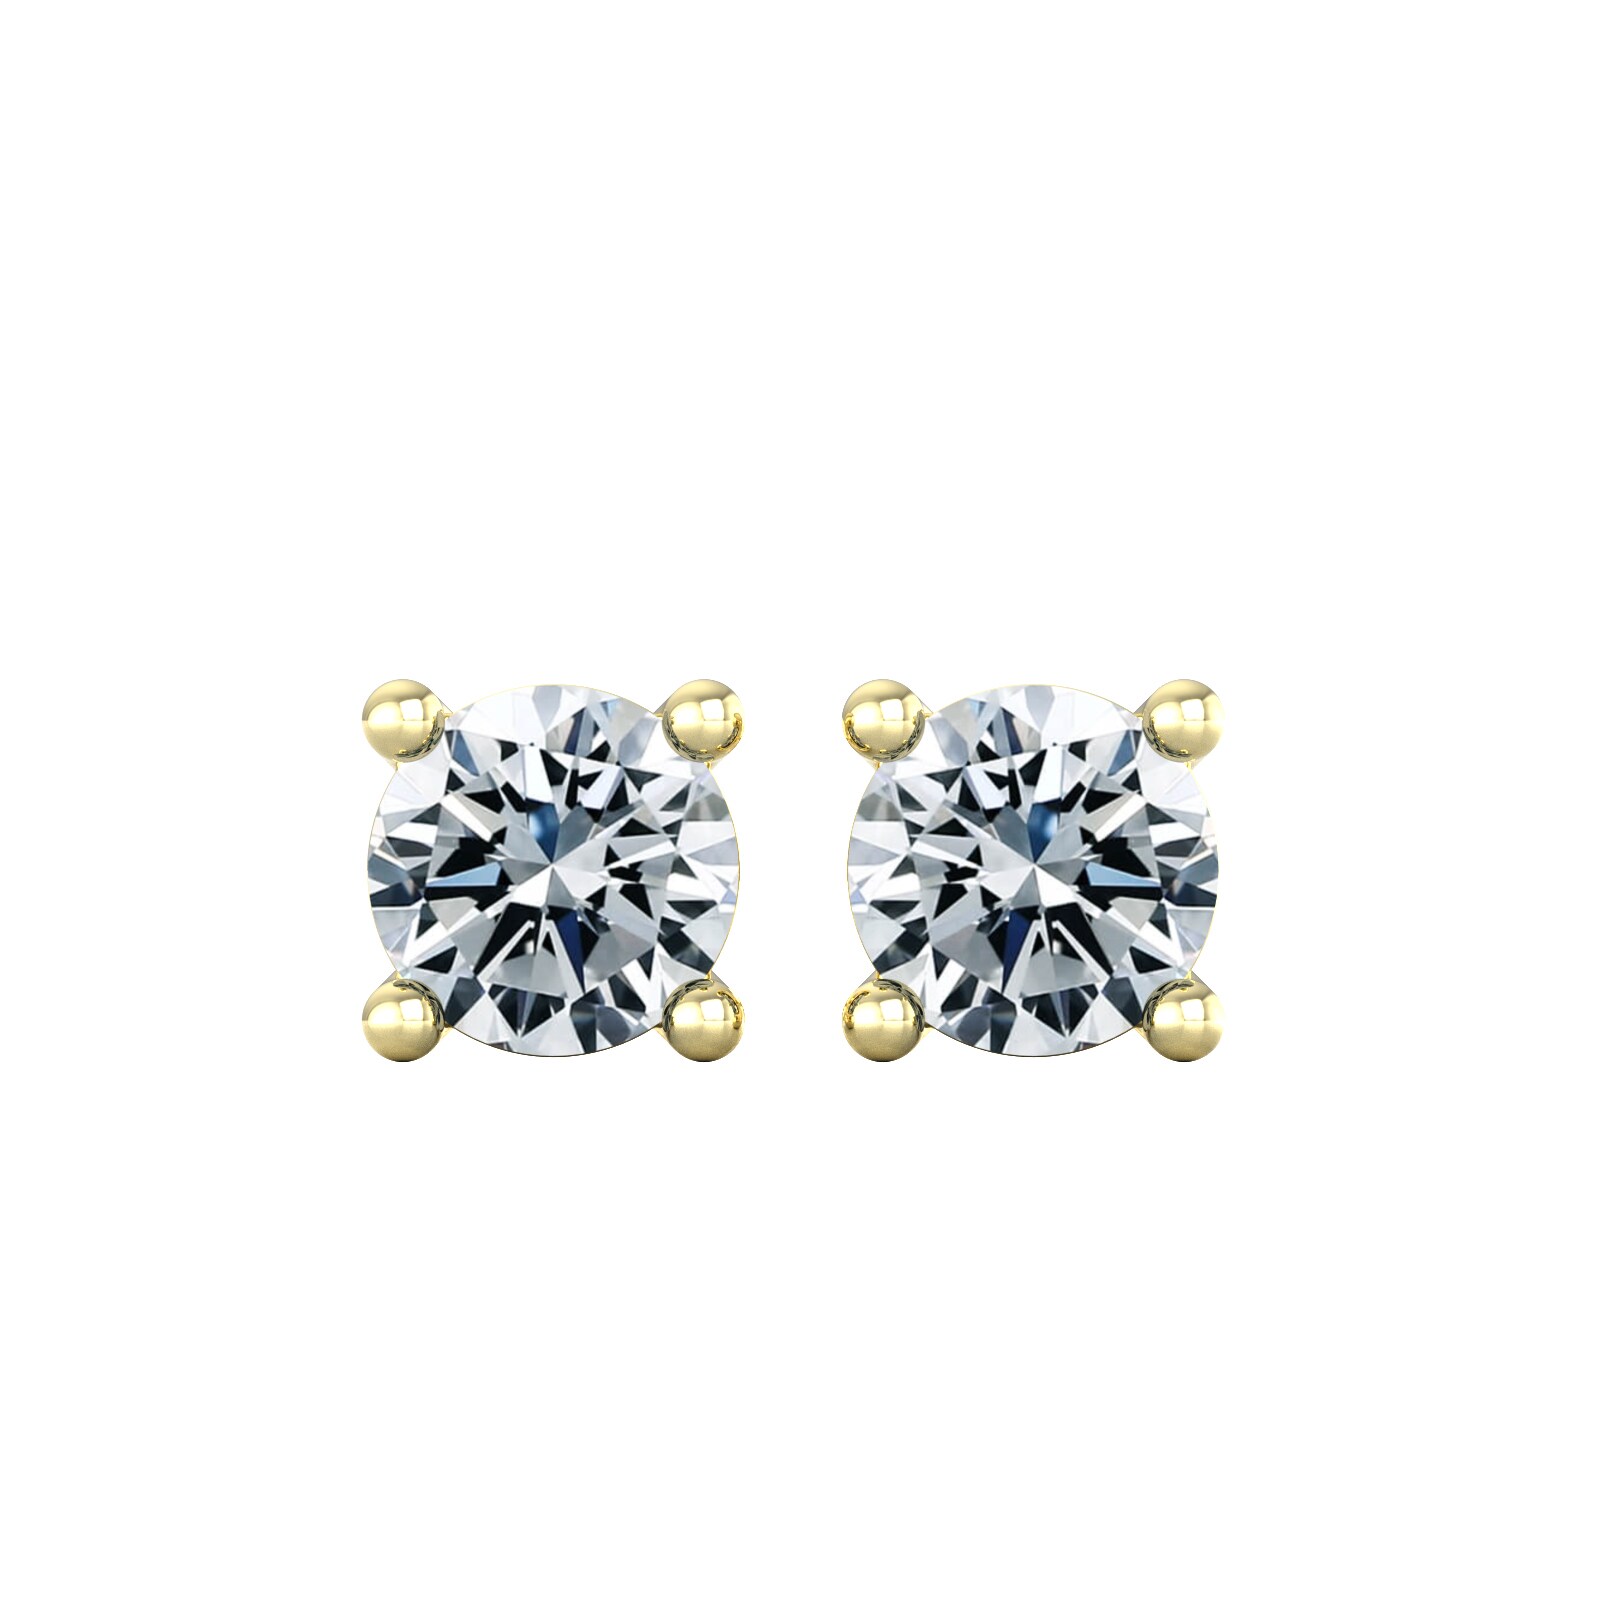 9ct Yellow Gold 0.80cttw Solitaire Diamond Stud Earrings